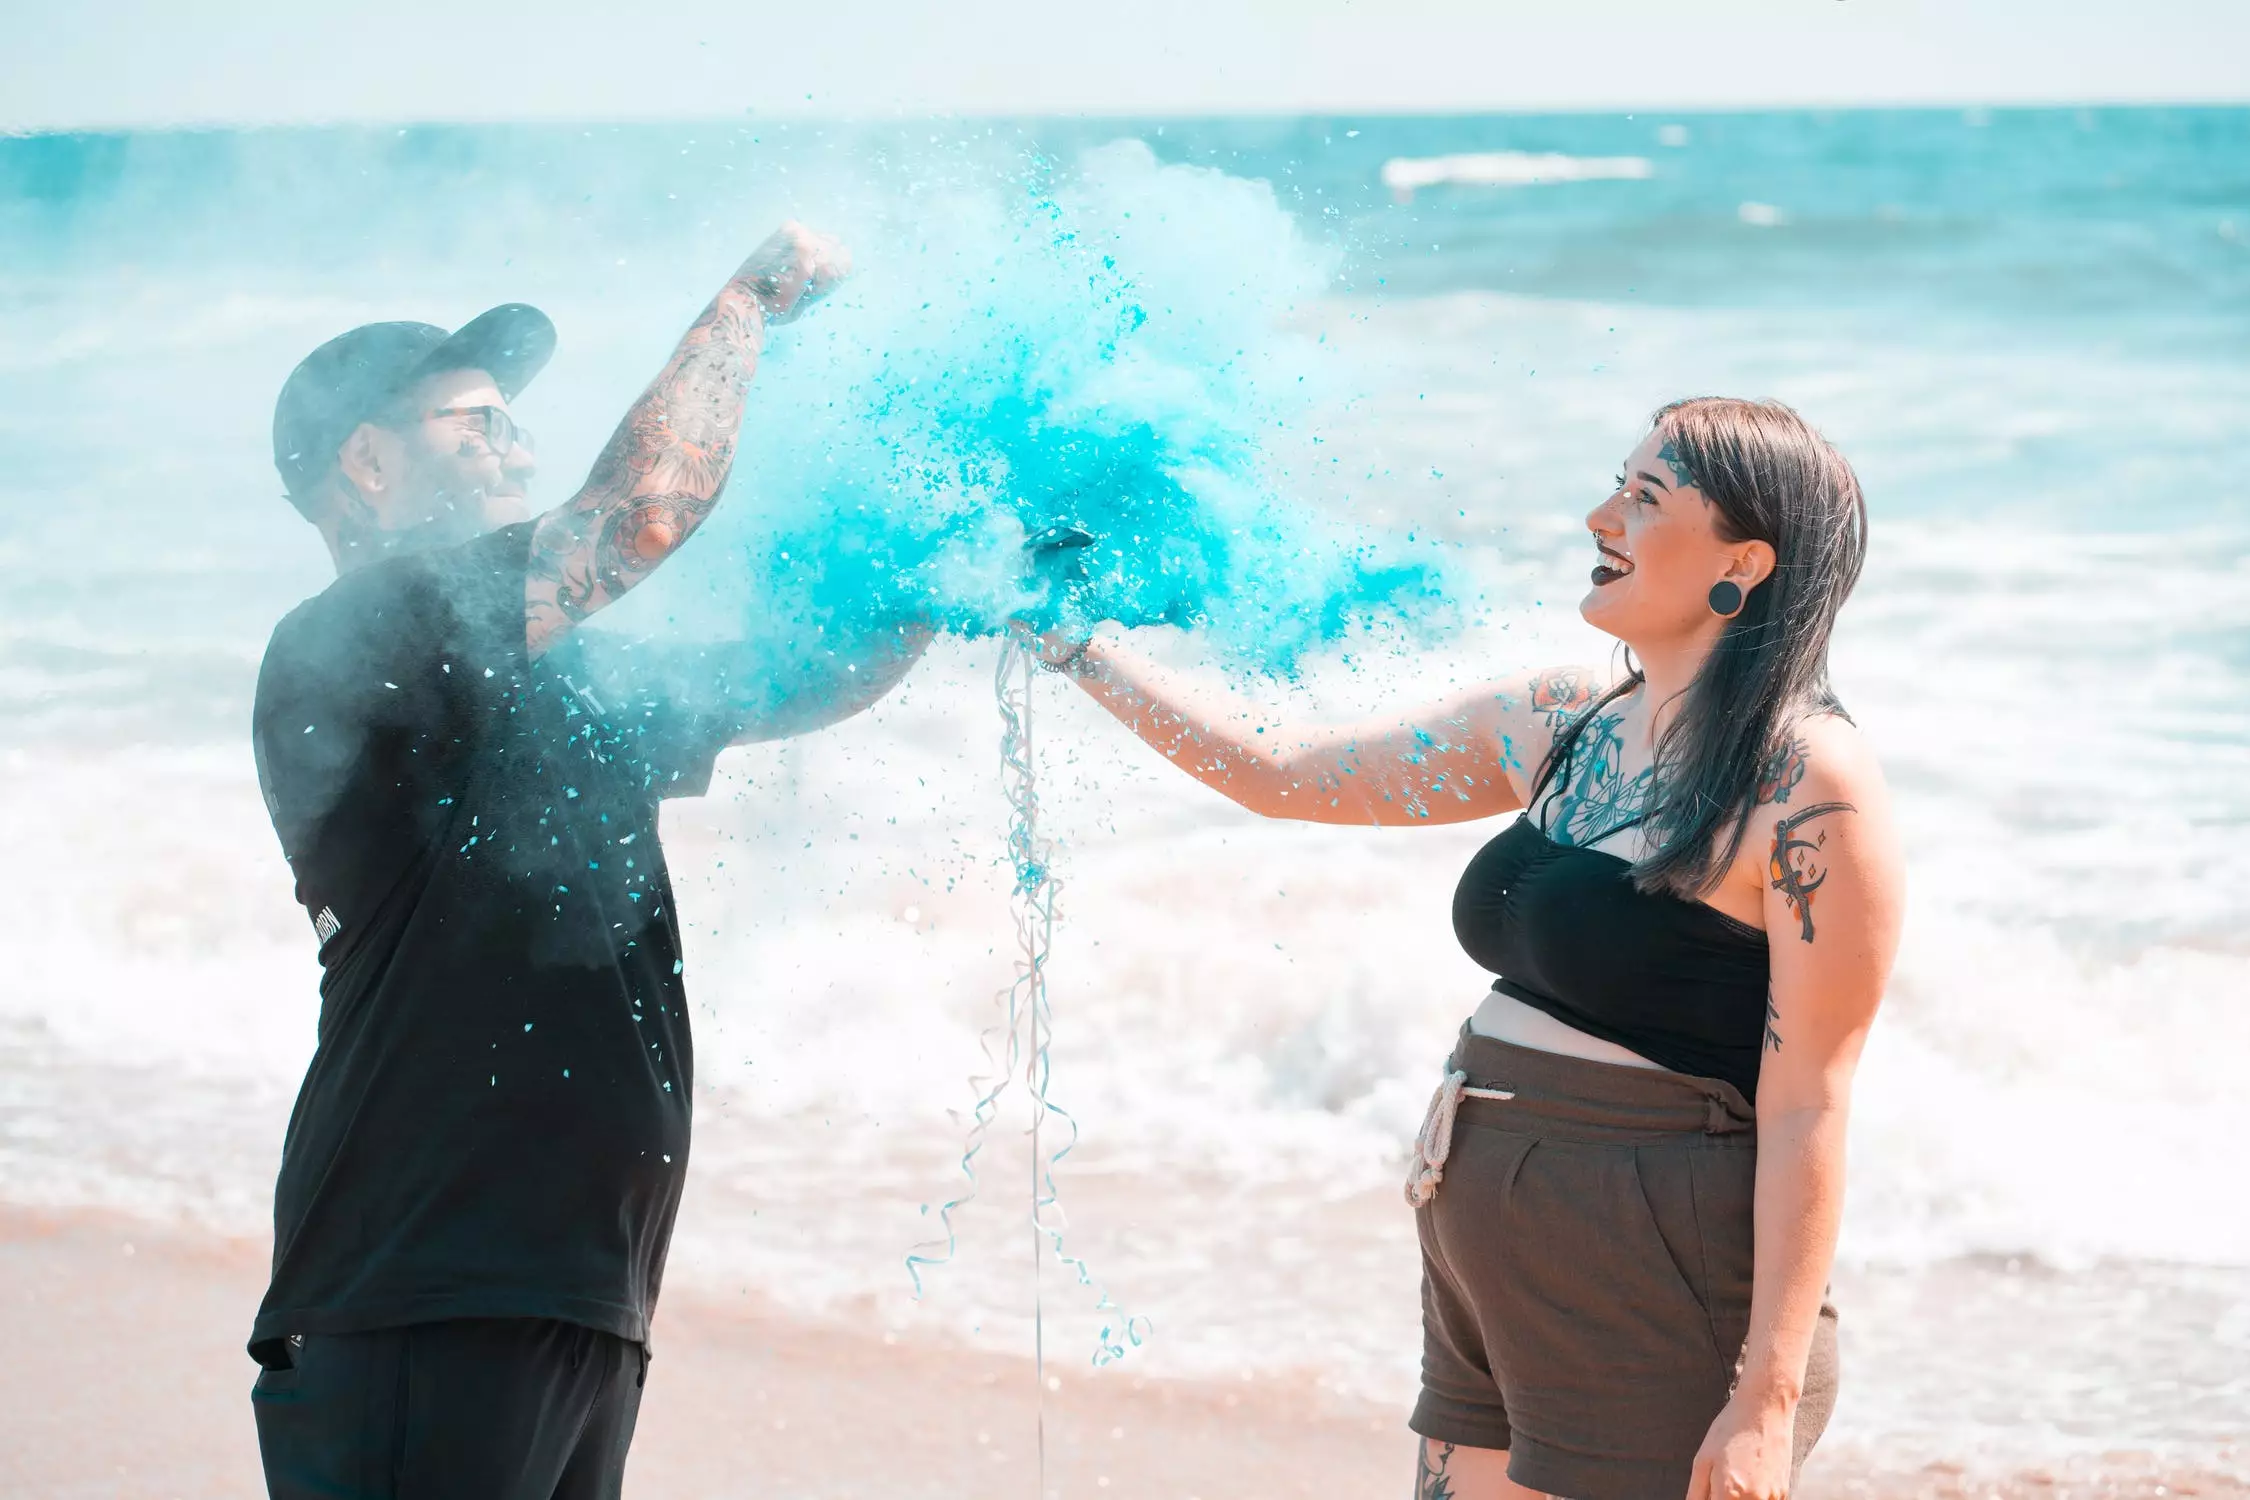 Gender reveal parties have grown increasingly elaborate and often involve fireworks or exploding canons (